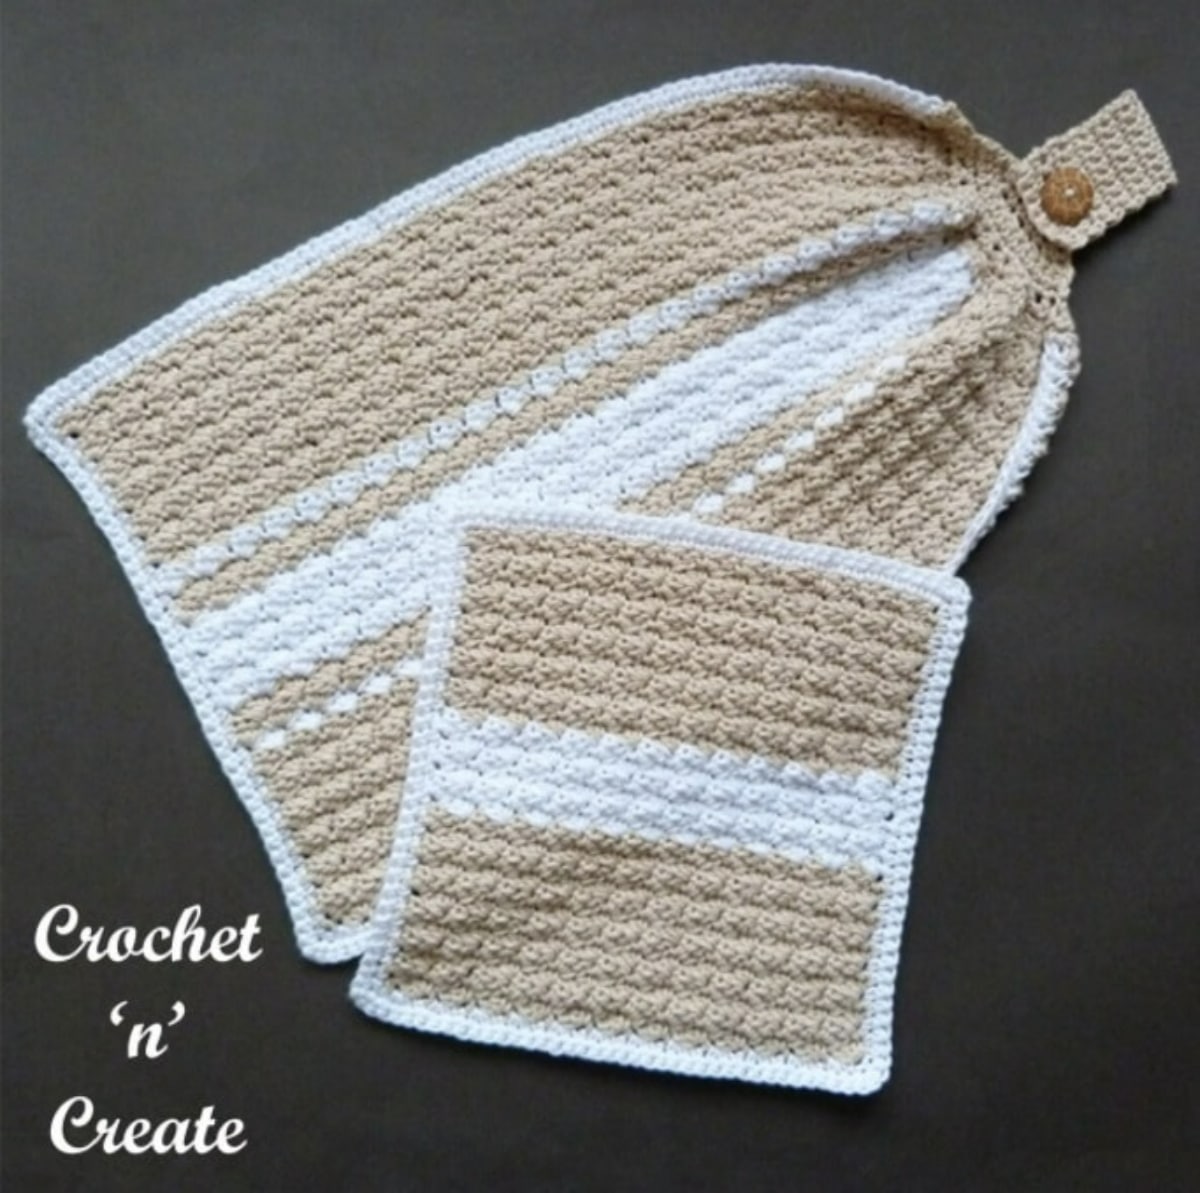 White and light brown striped hand towel with a button and loop at the top to secure it next to a small brown and white striped cloth.